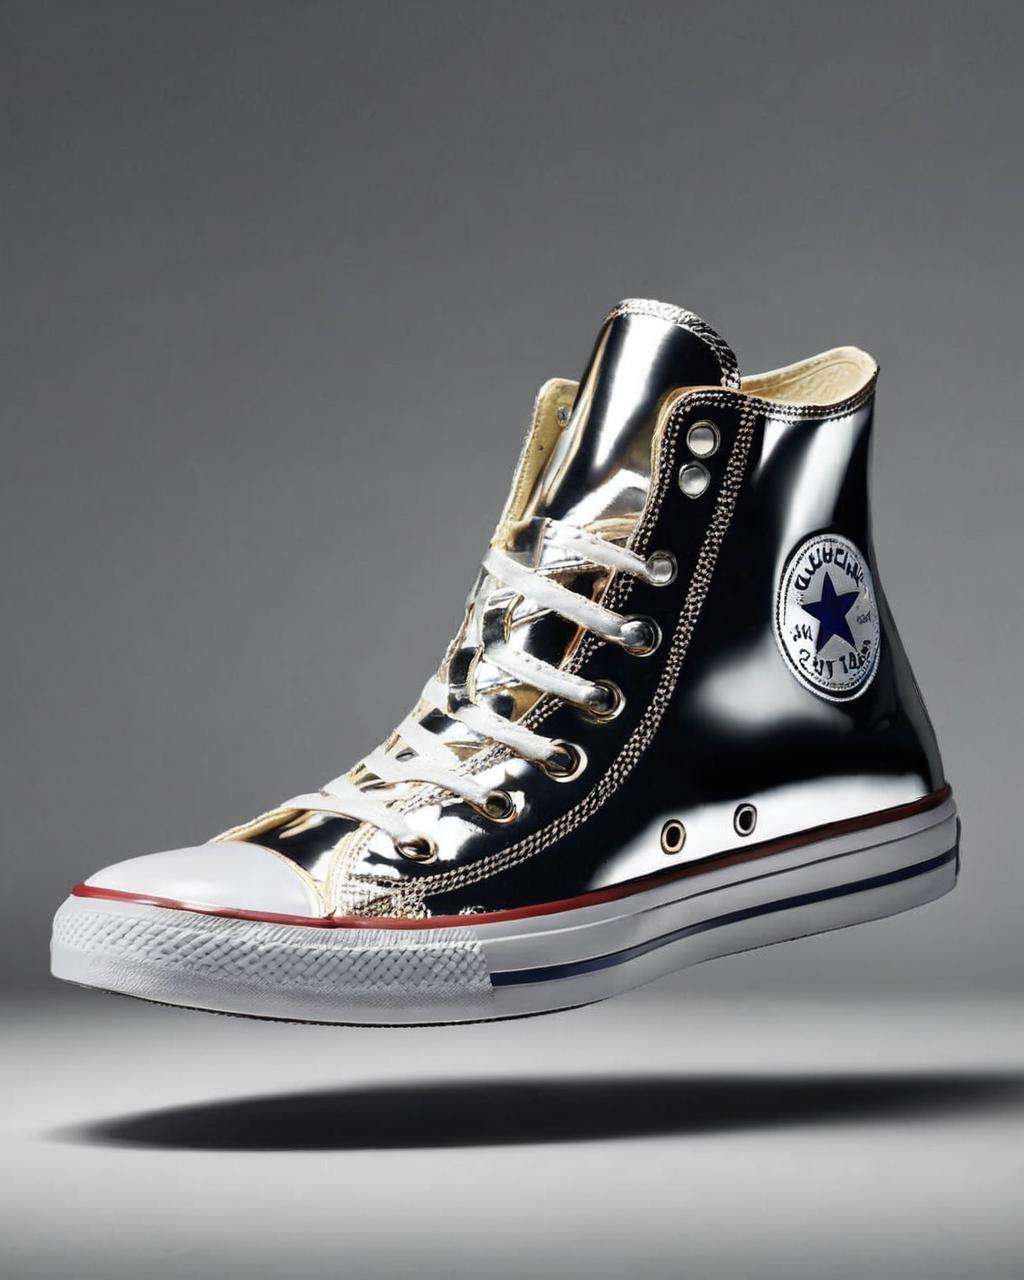 Converse Chuck Taylor metallic sneakers, fashion-forward shine:0.6, photographed with dramatic lighting, highlighting their metallic finish and reflective elements, making a bold fashion statement, lifestyle shot:0.8.<lora:shoes:1.0>